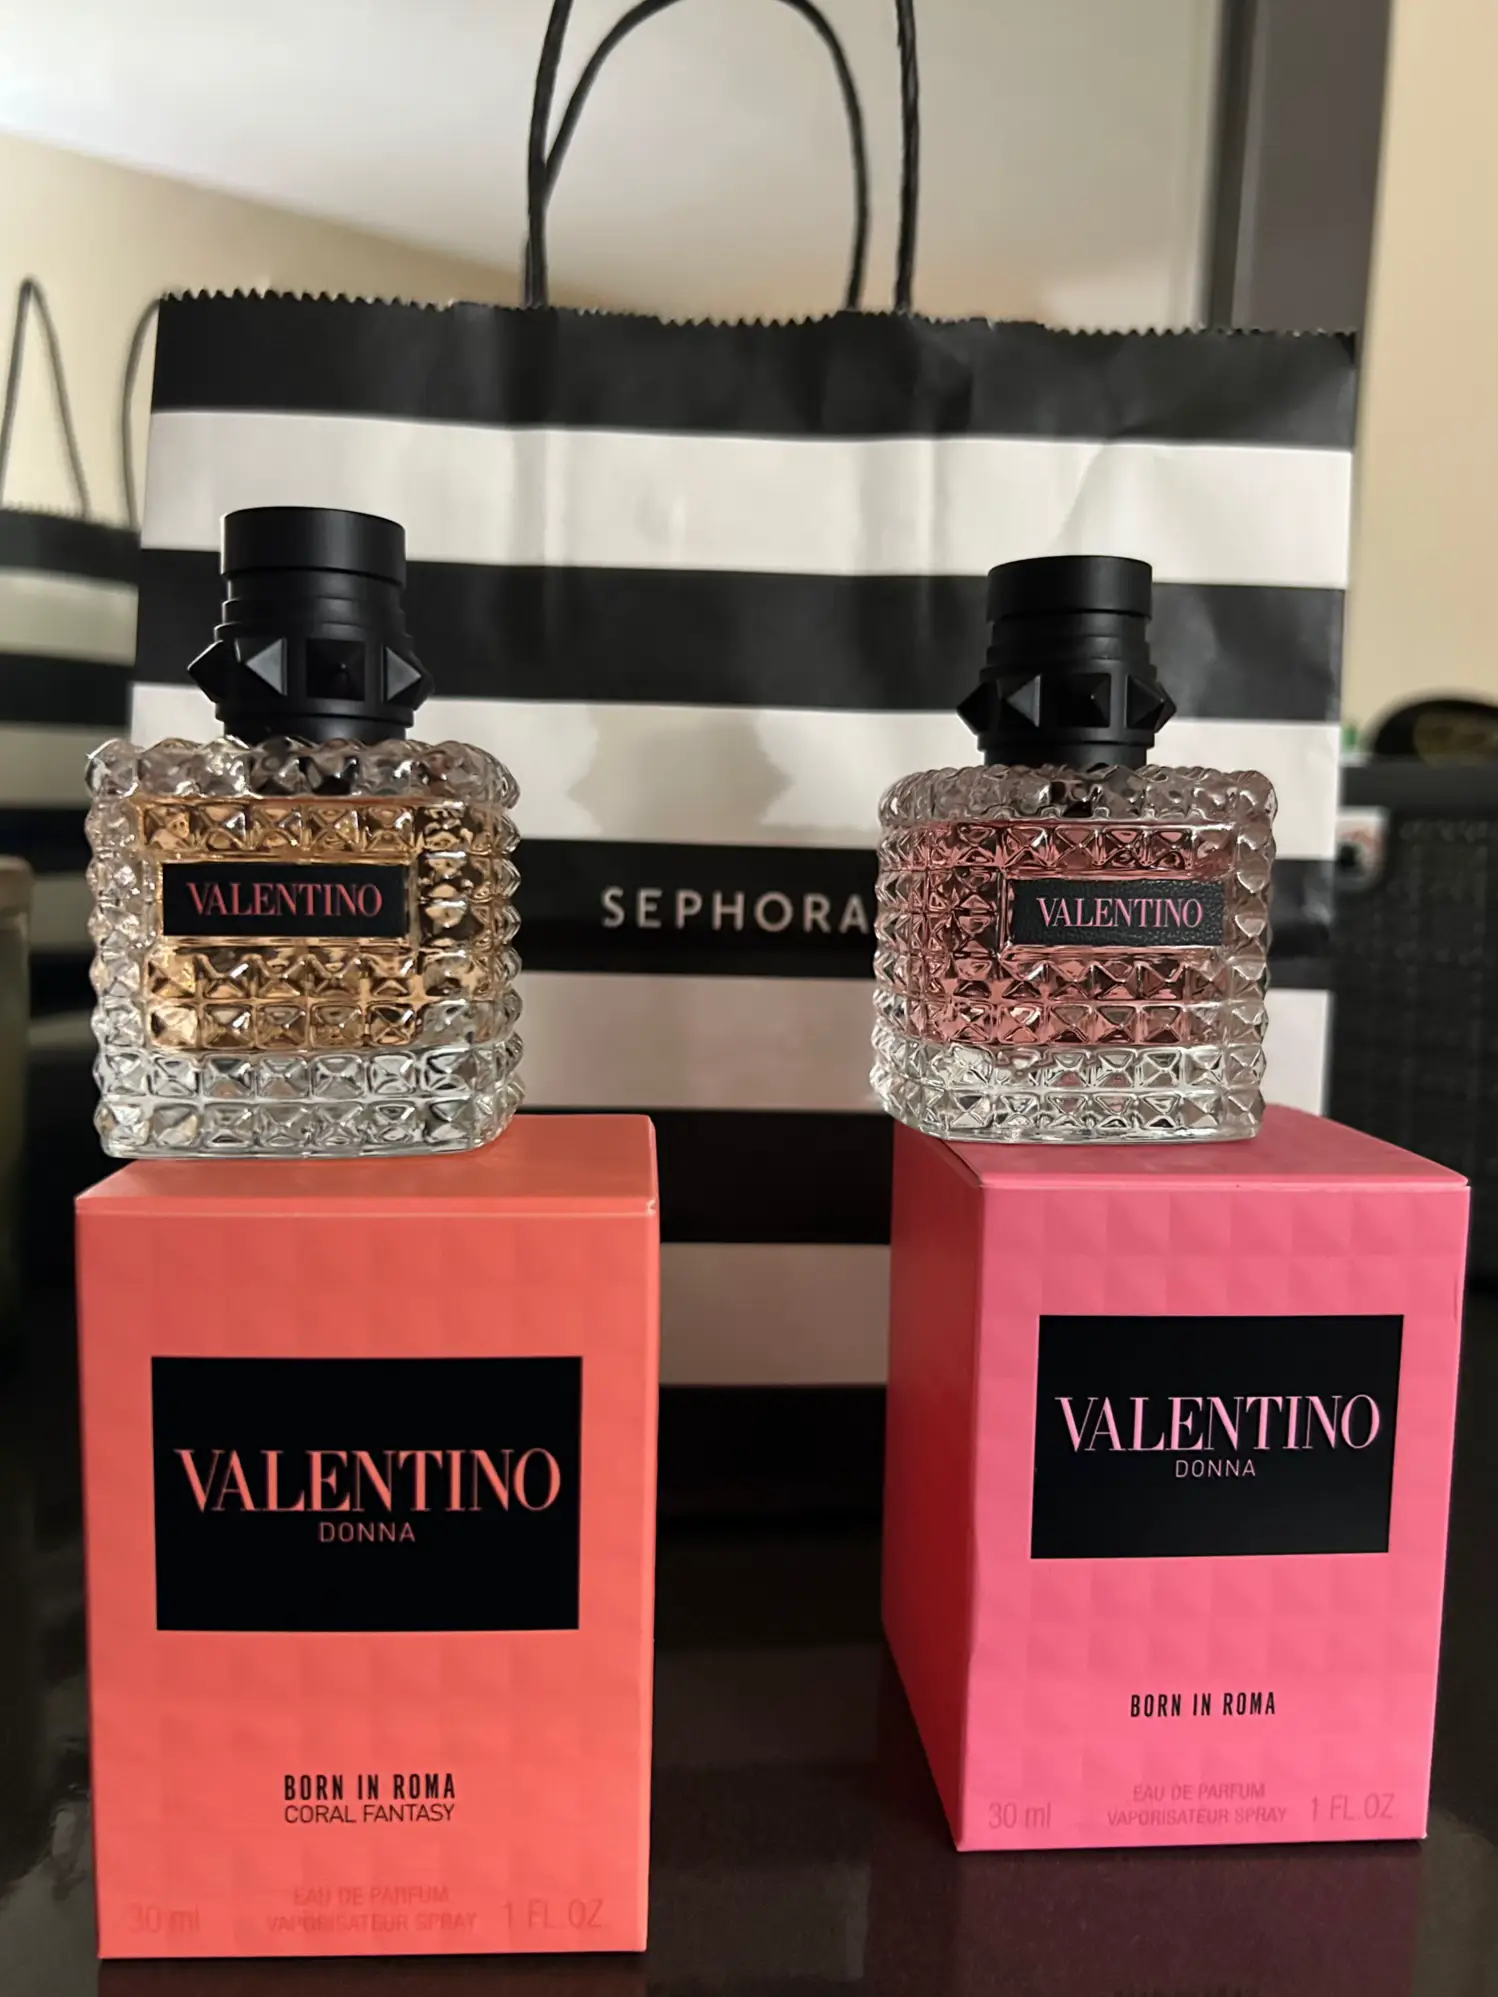 Born in Roma, Valentino Donna💕 Couture floral paired with bourbon  vanilla~my new favorite parfum in the iconic, pink rockstud bottle